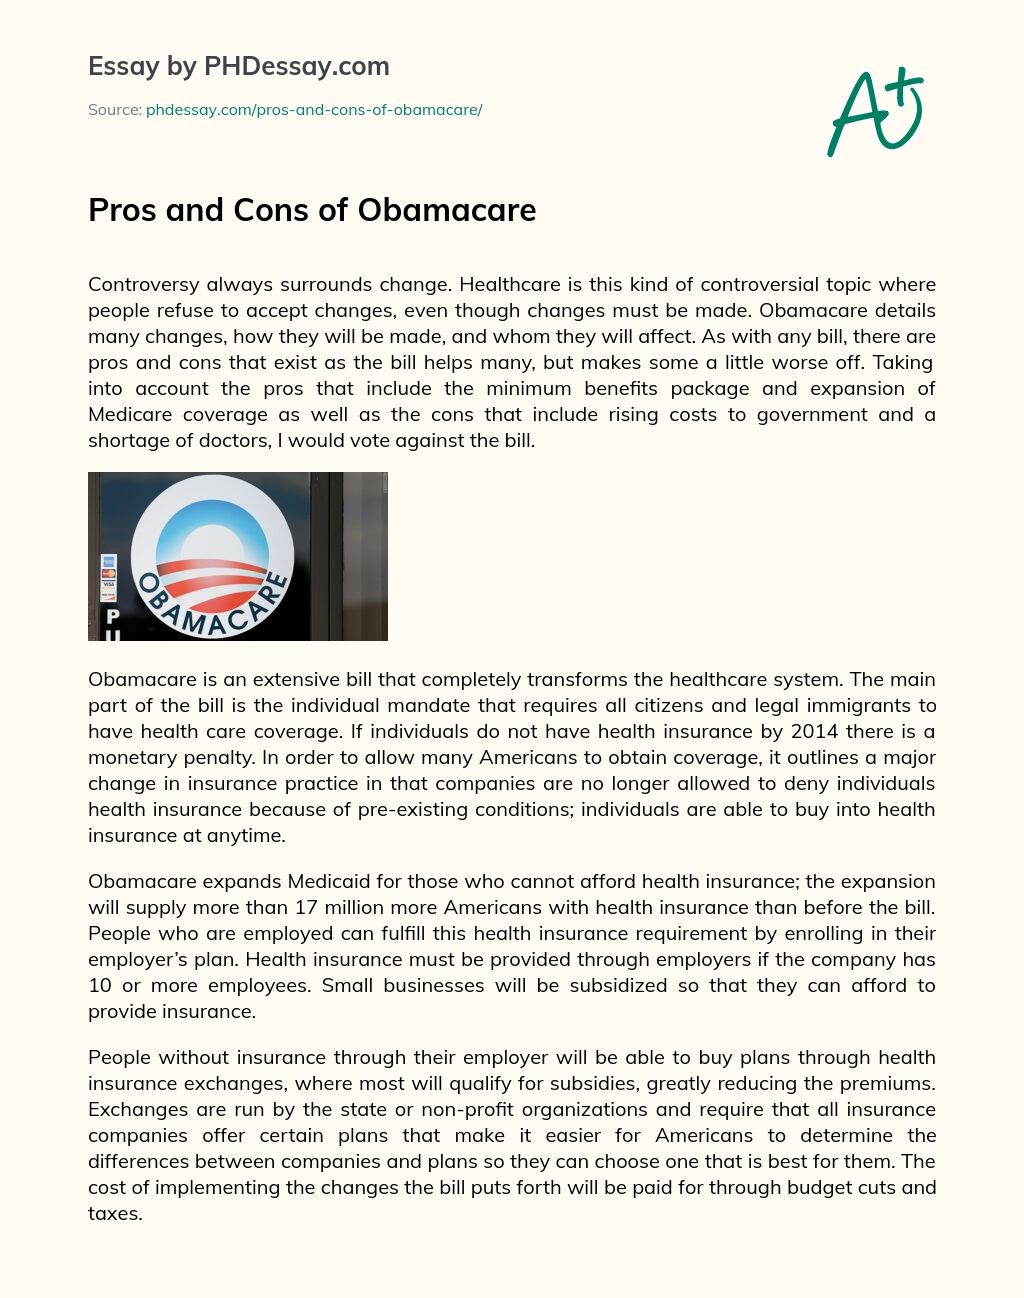 Pros and Cons of Obamacare essay